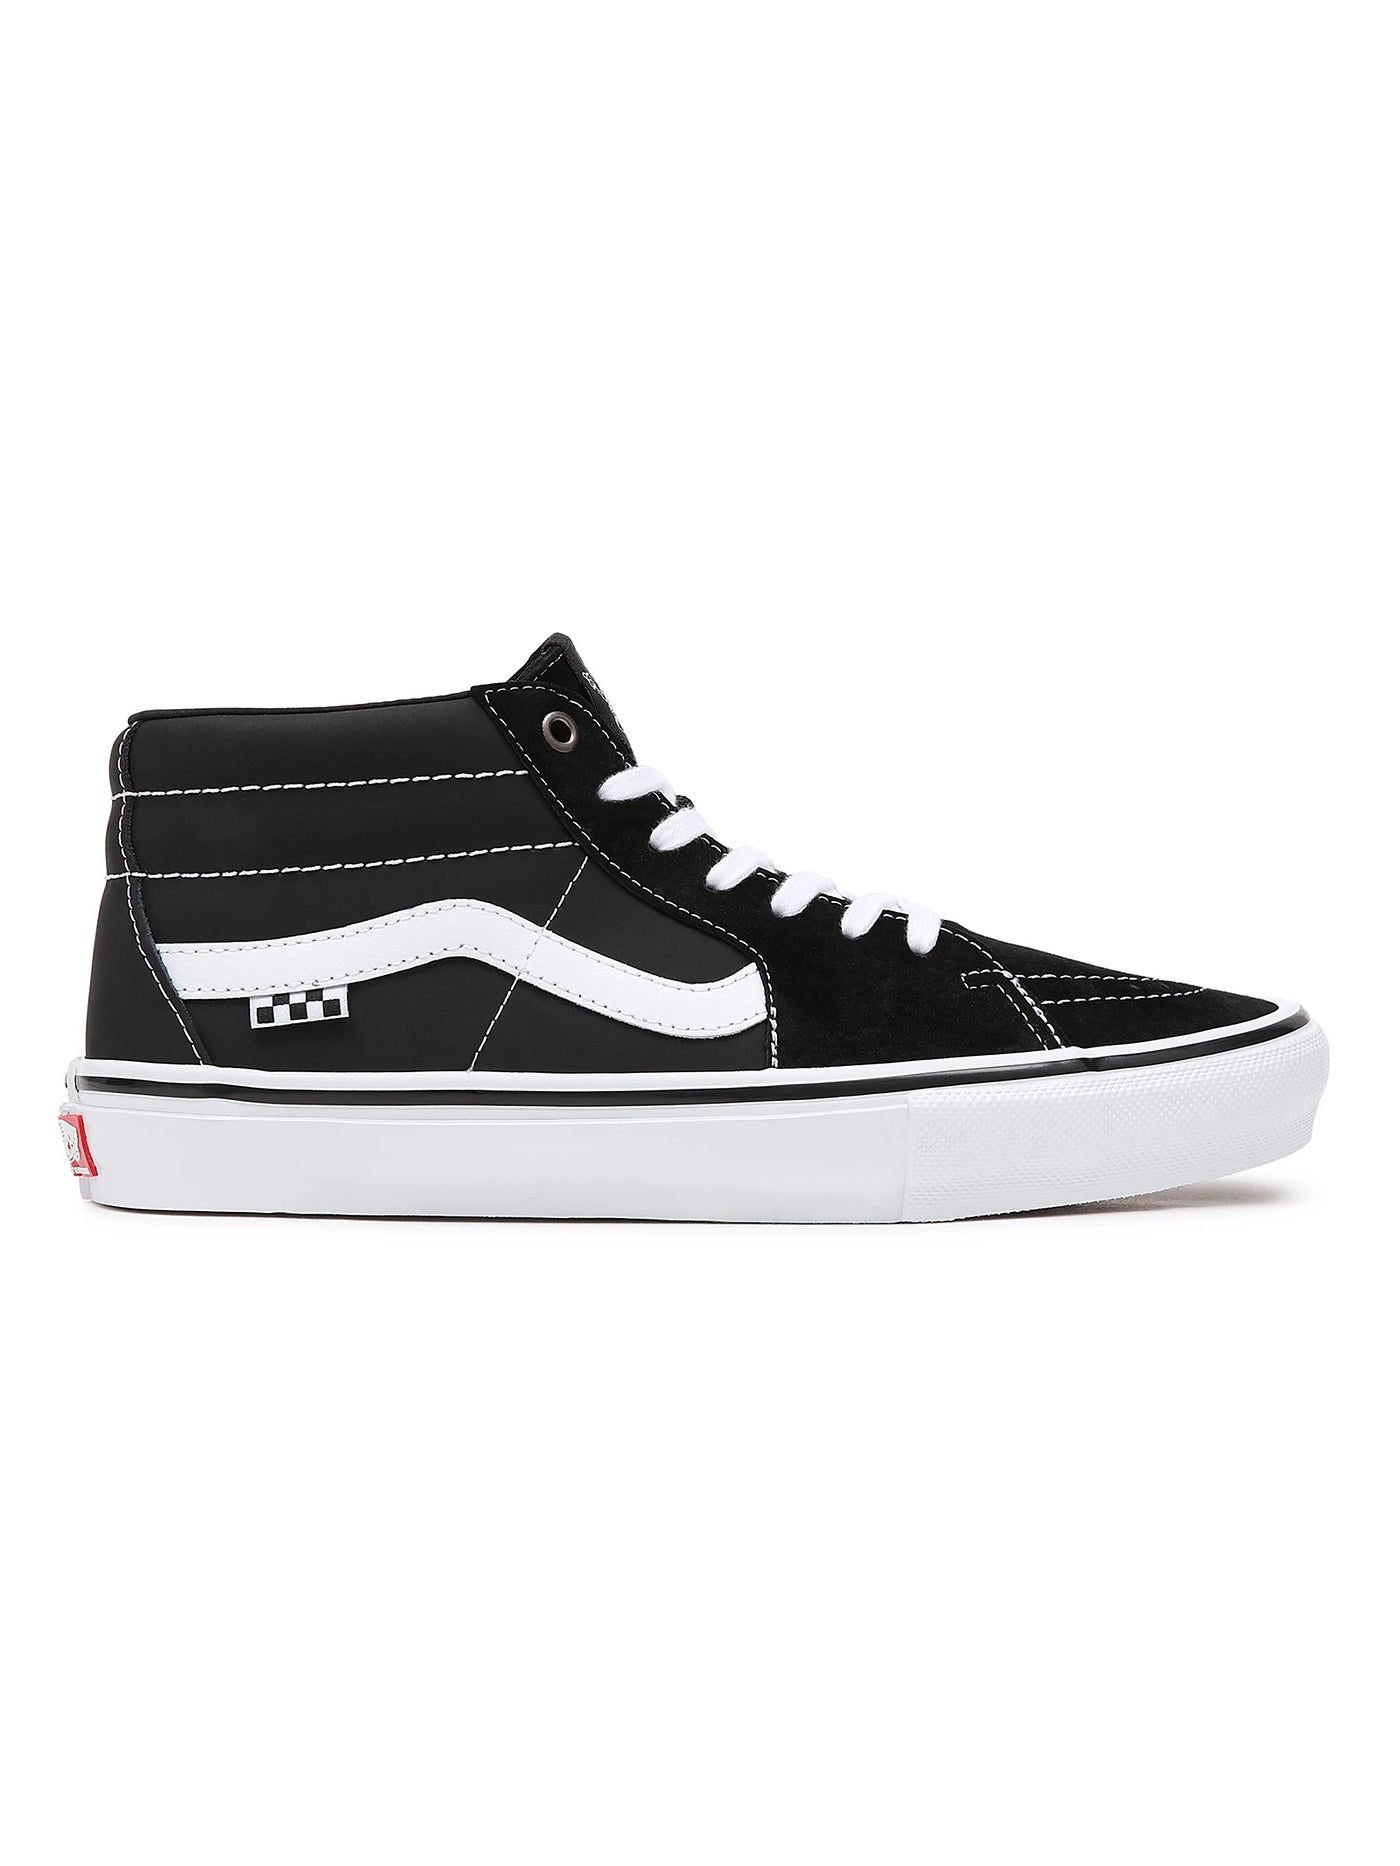 Vans Skate Grosso Mid Black/White/Emo Leather Shoes